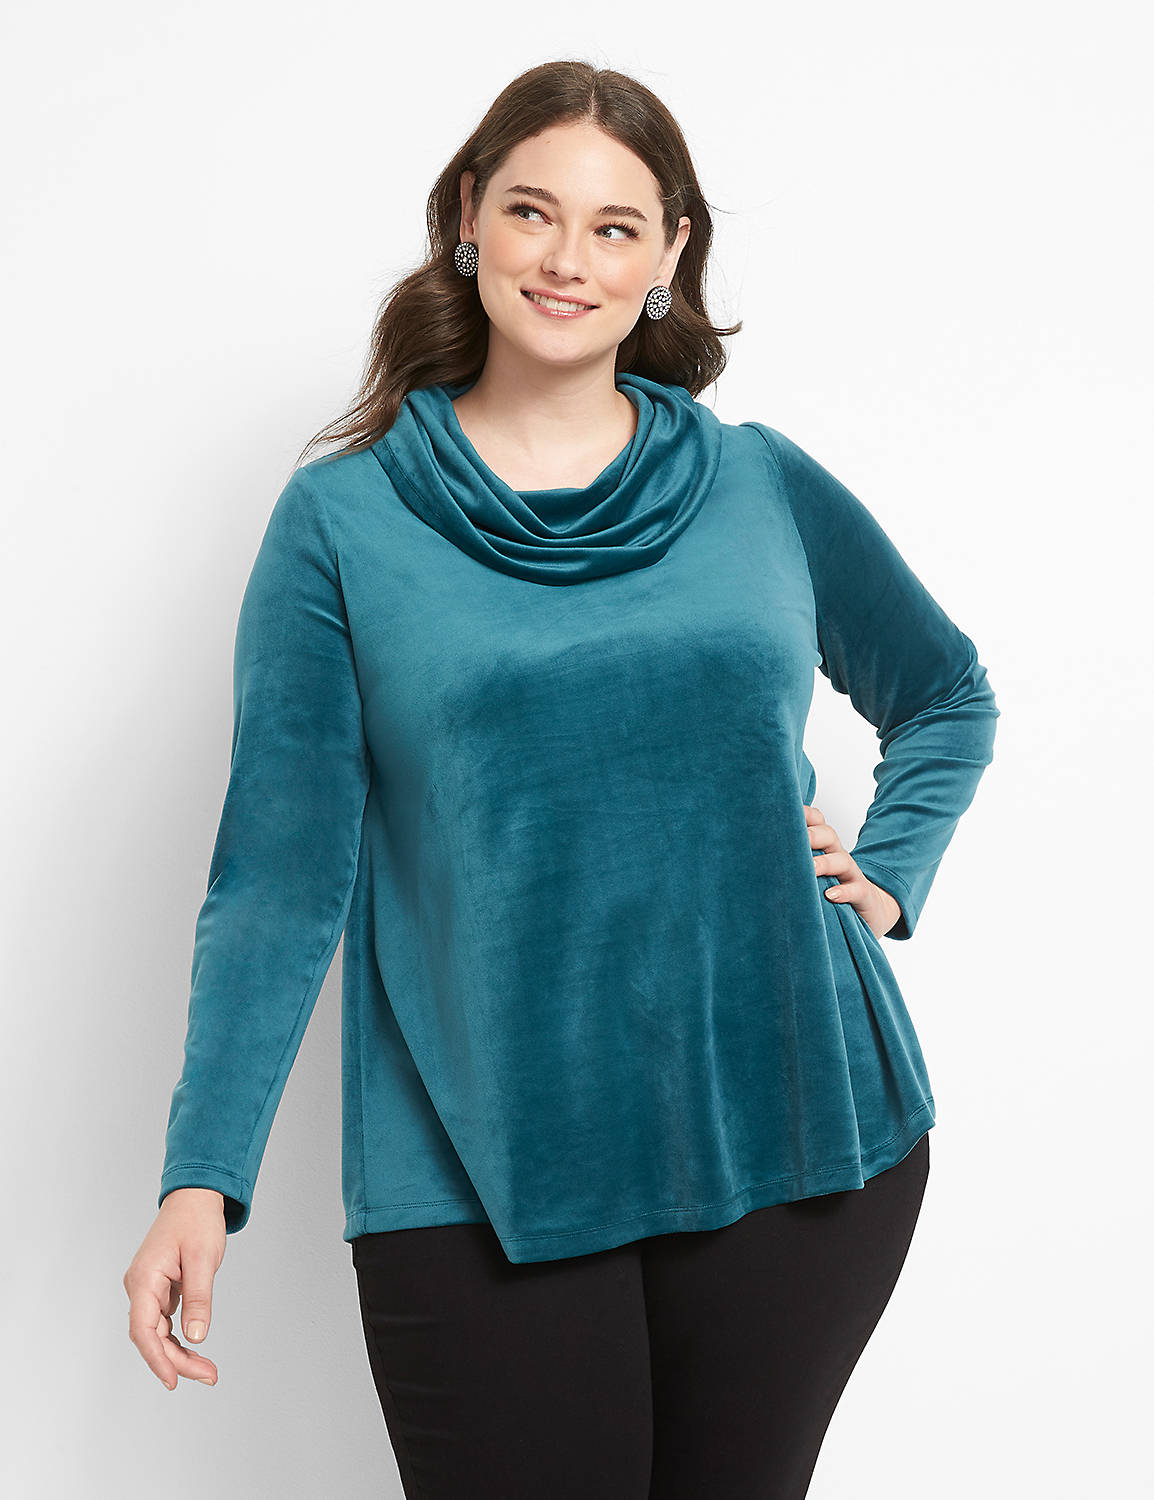 Long Sleeve Cowl Neck Moderate Swing Knit Top In Velour 1124634:PANTONE Deep Teal:10/12 Product Image 1